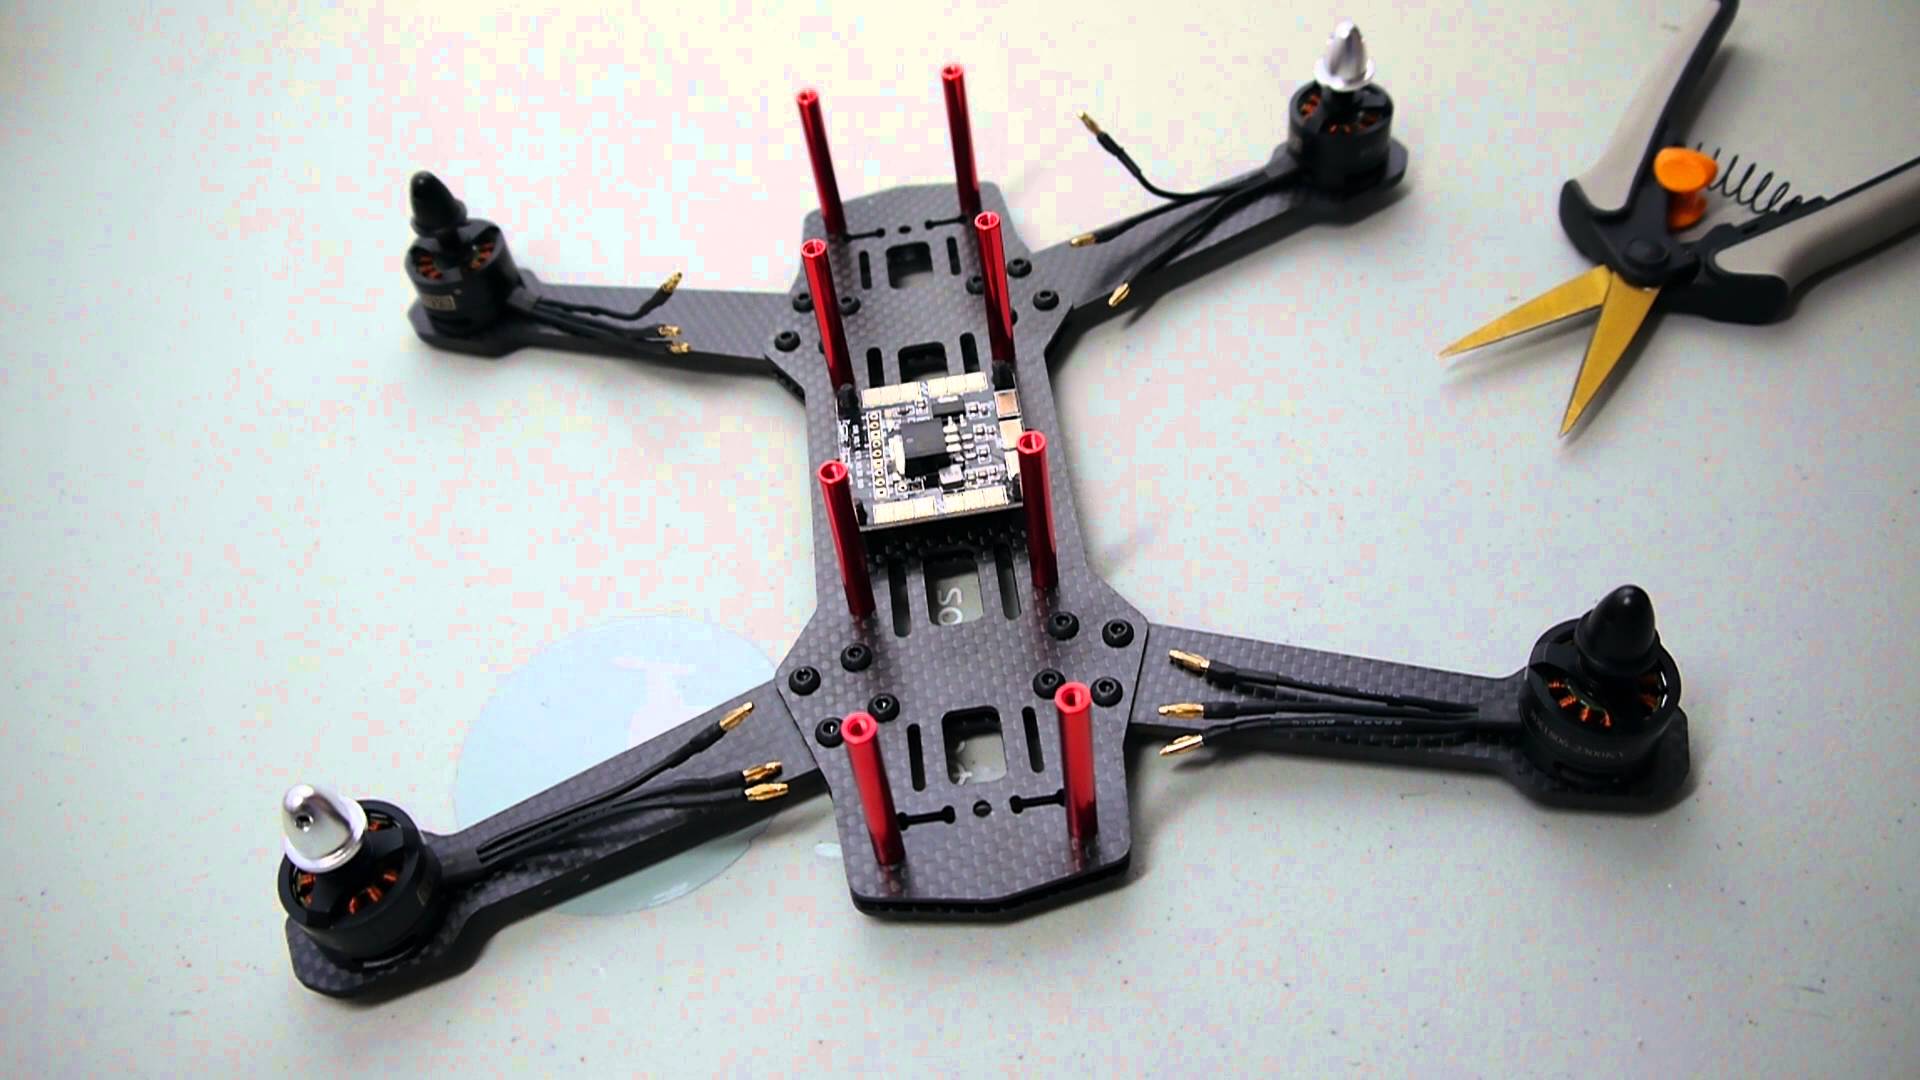 Updated: How to build a Mini Quadcopter for FPV Racing By Mini Quad Bros